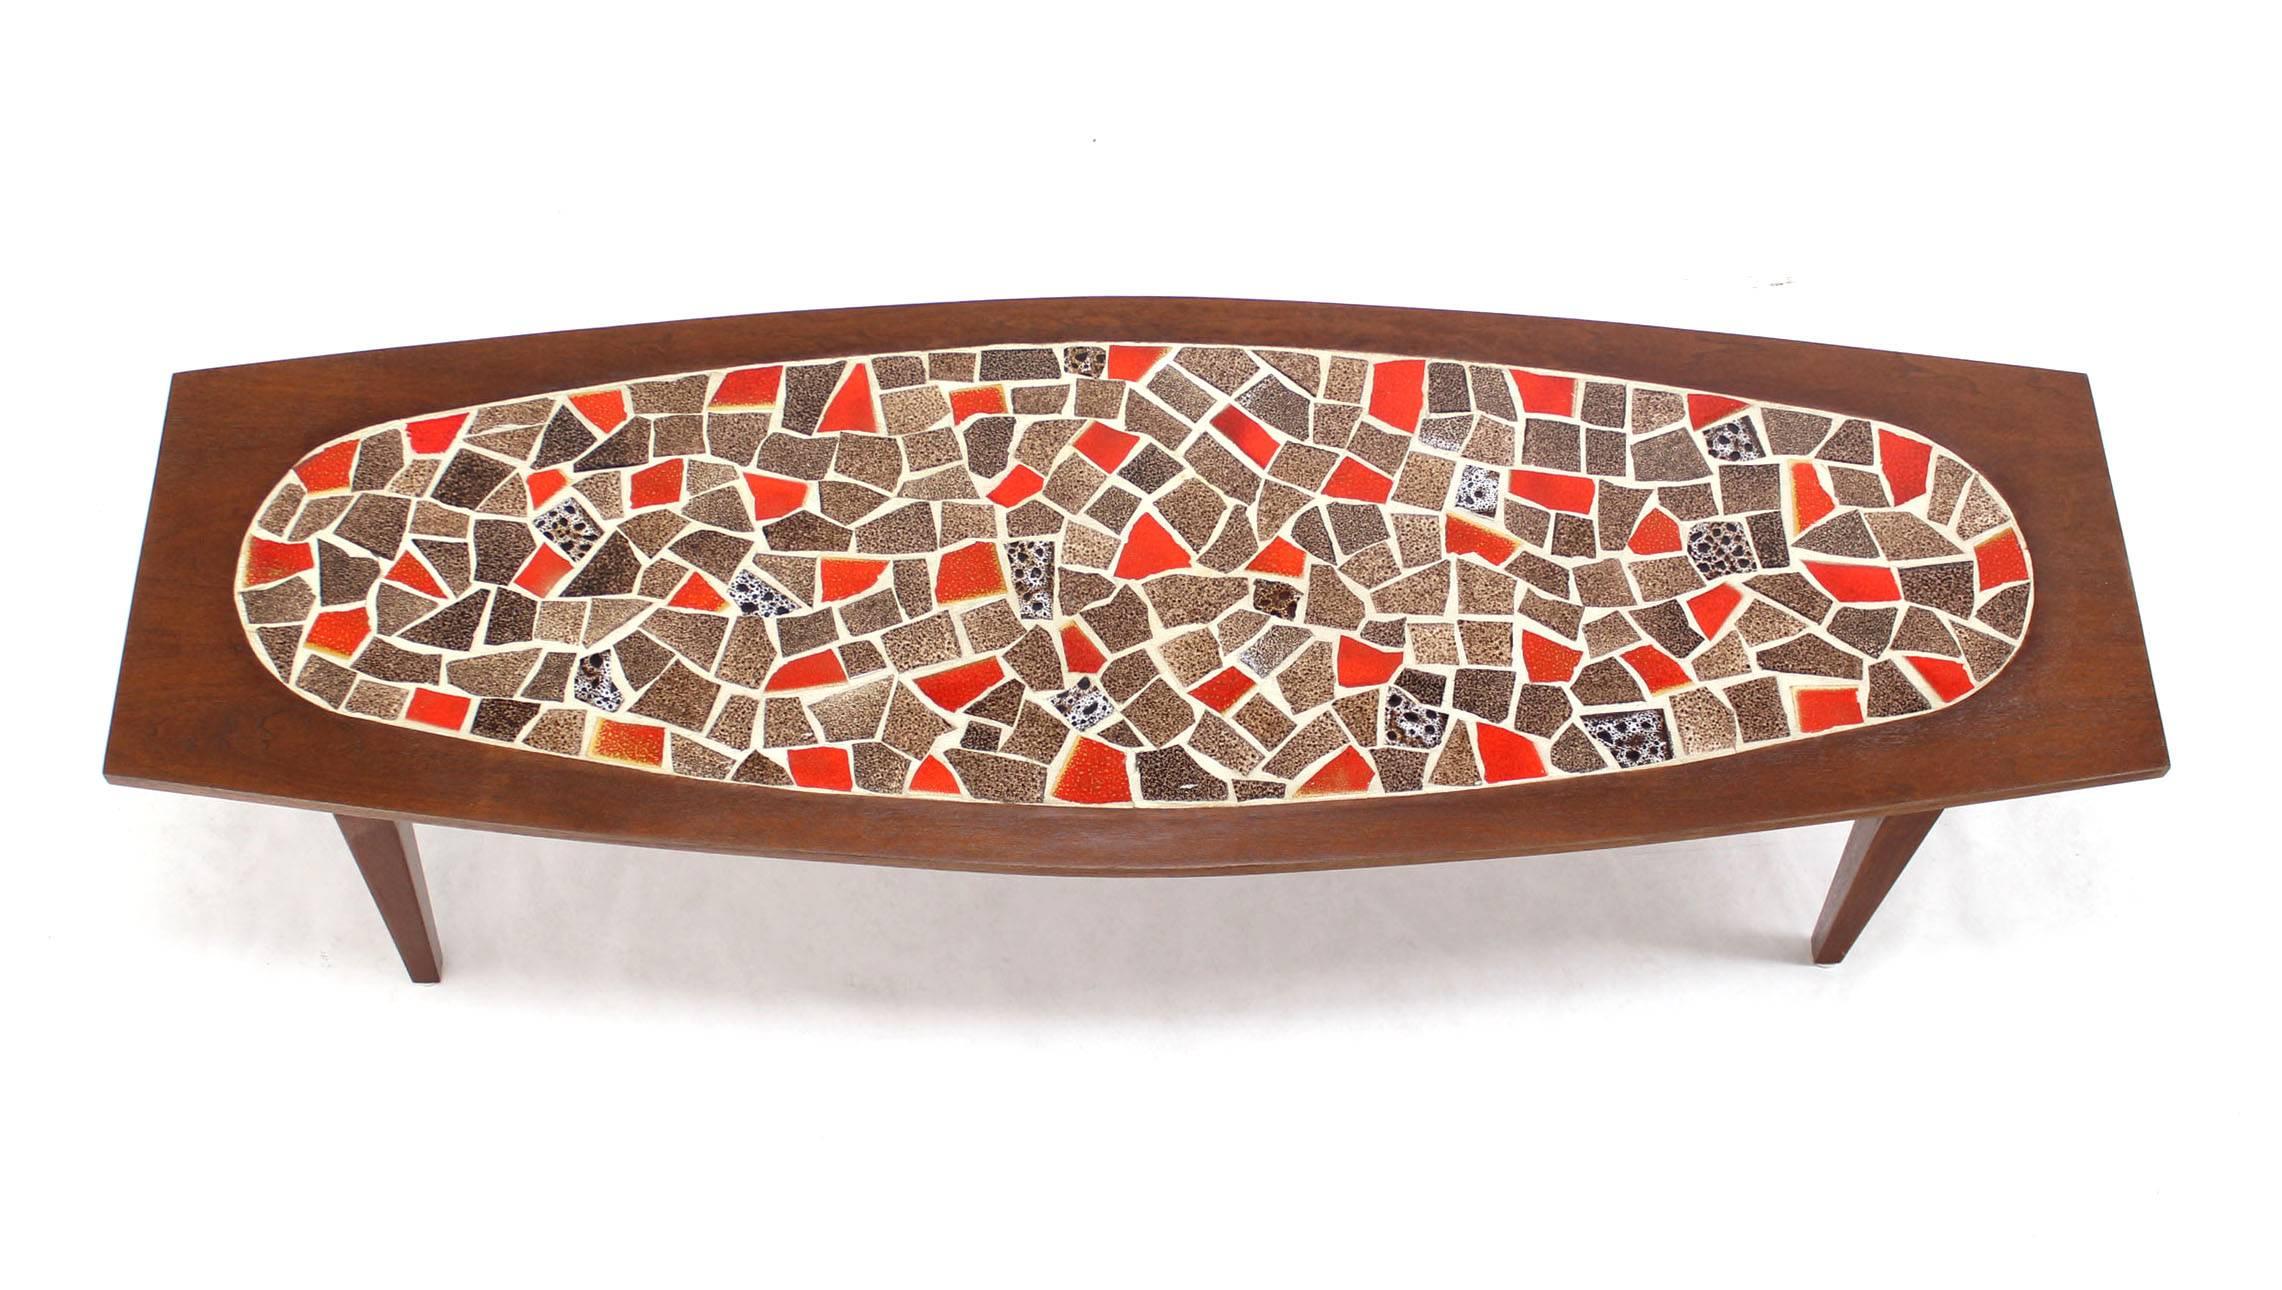 Mosaic Oval Mossaic Tile Top Rectangular Boat Shape Walnut Long Coffee Table.  For Sale